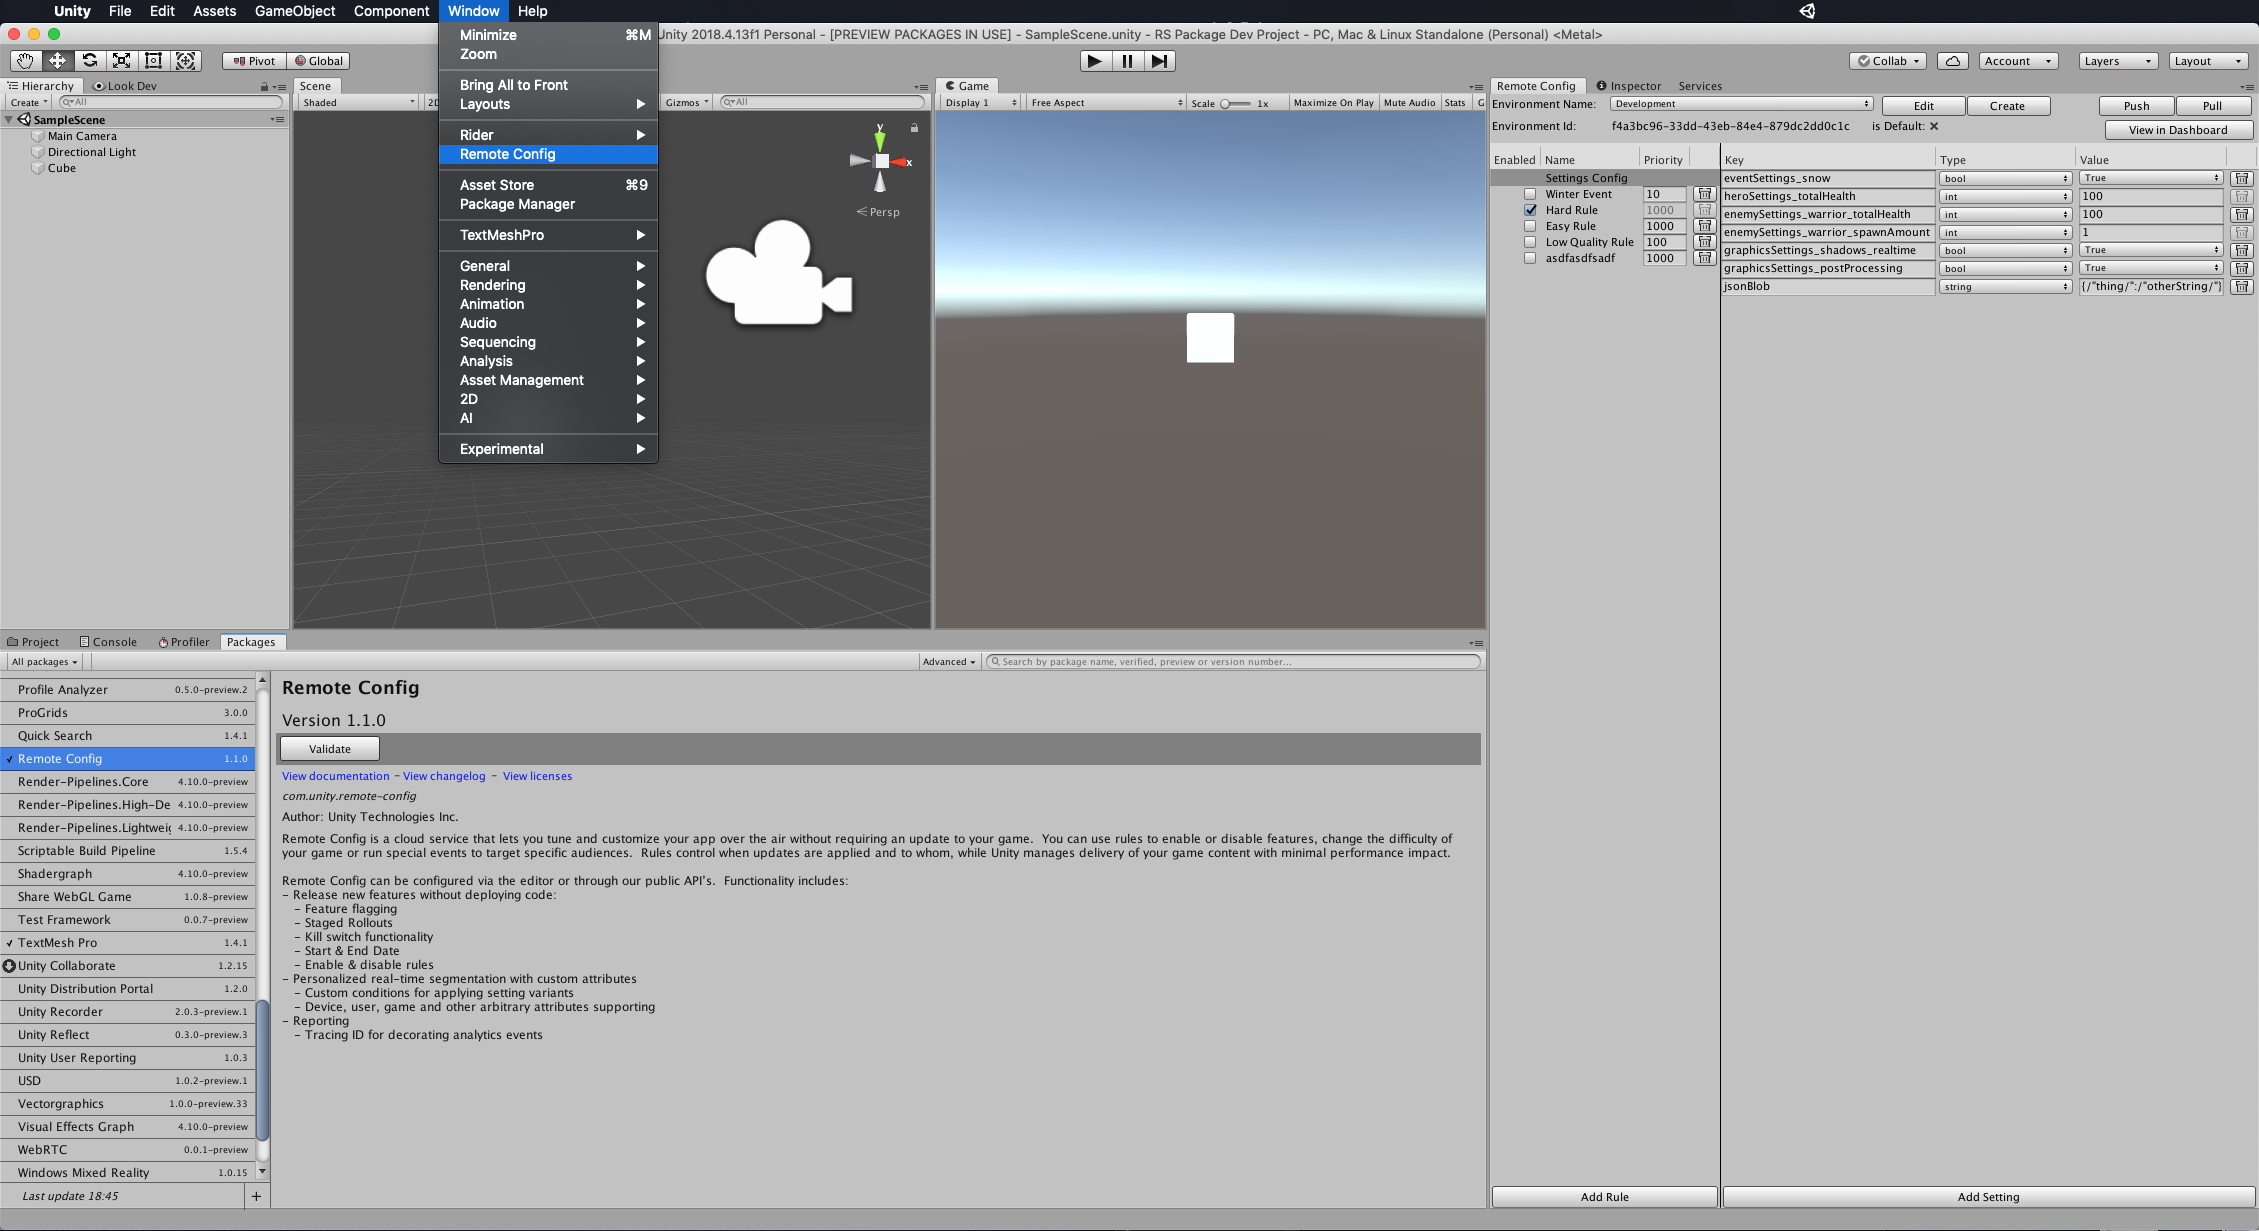 Navigating to the Remote Config window in the Unity Editor.